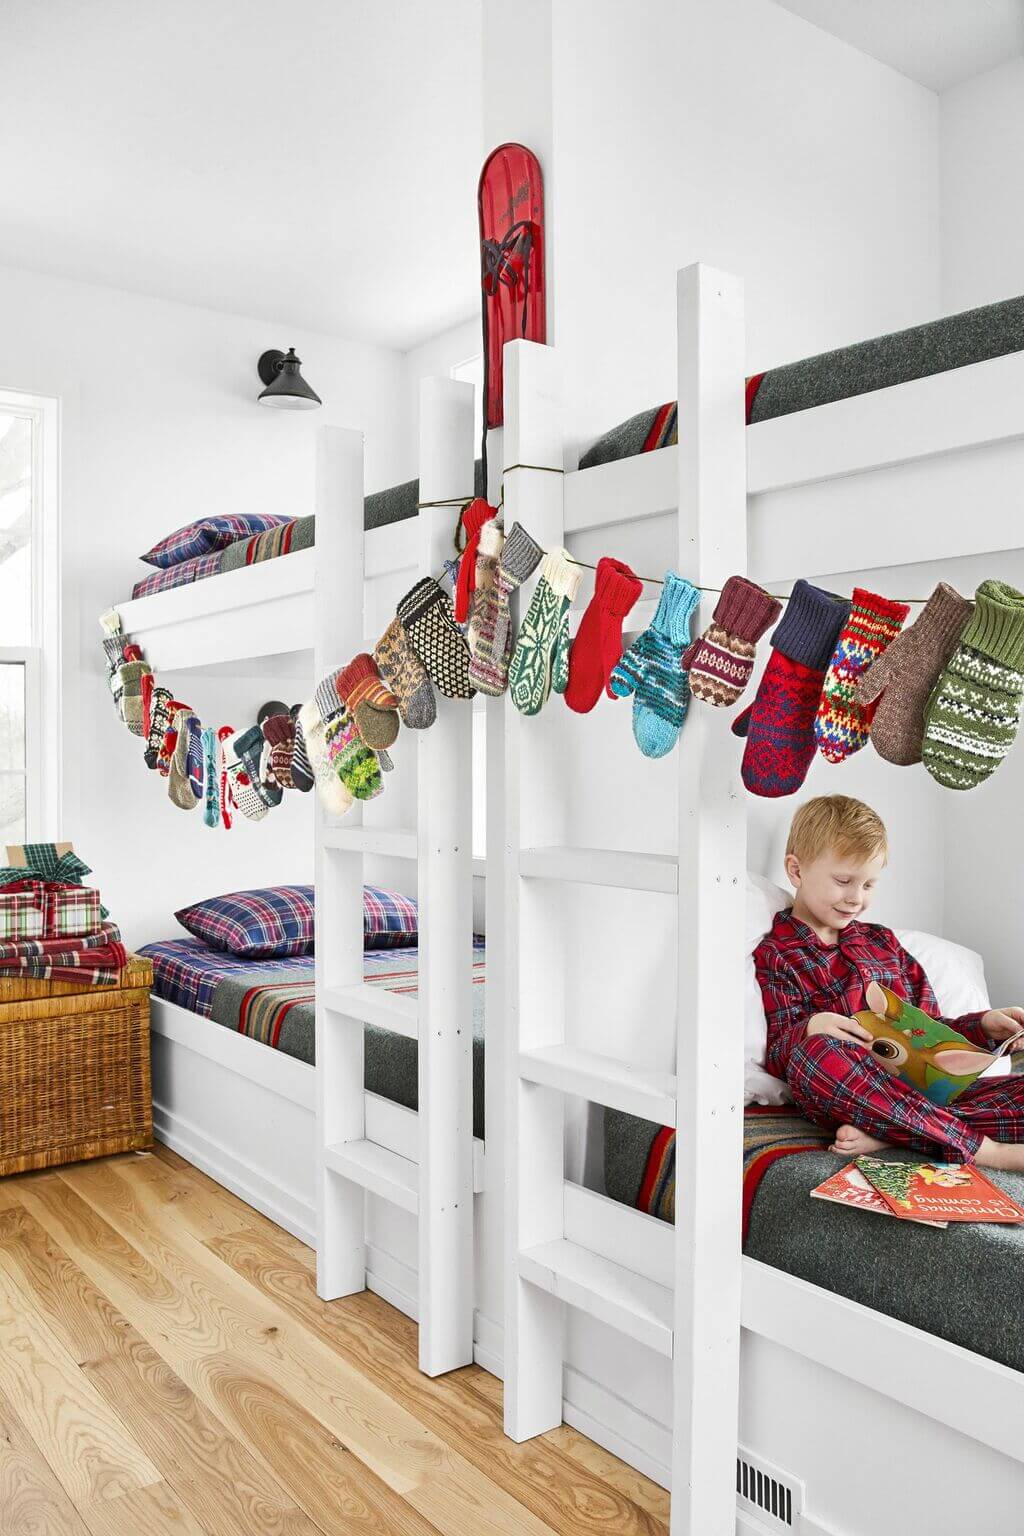 A young boy sitting on a bunk bed reading a book
